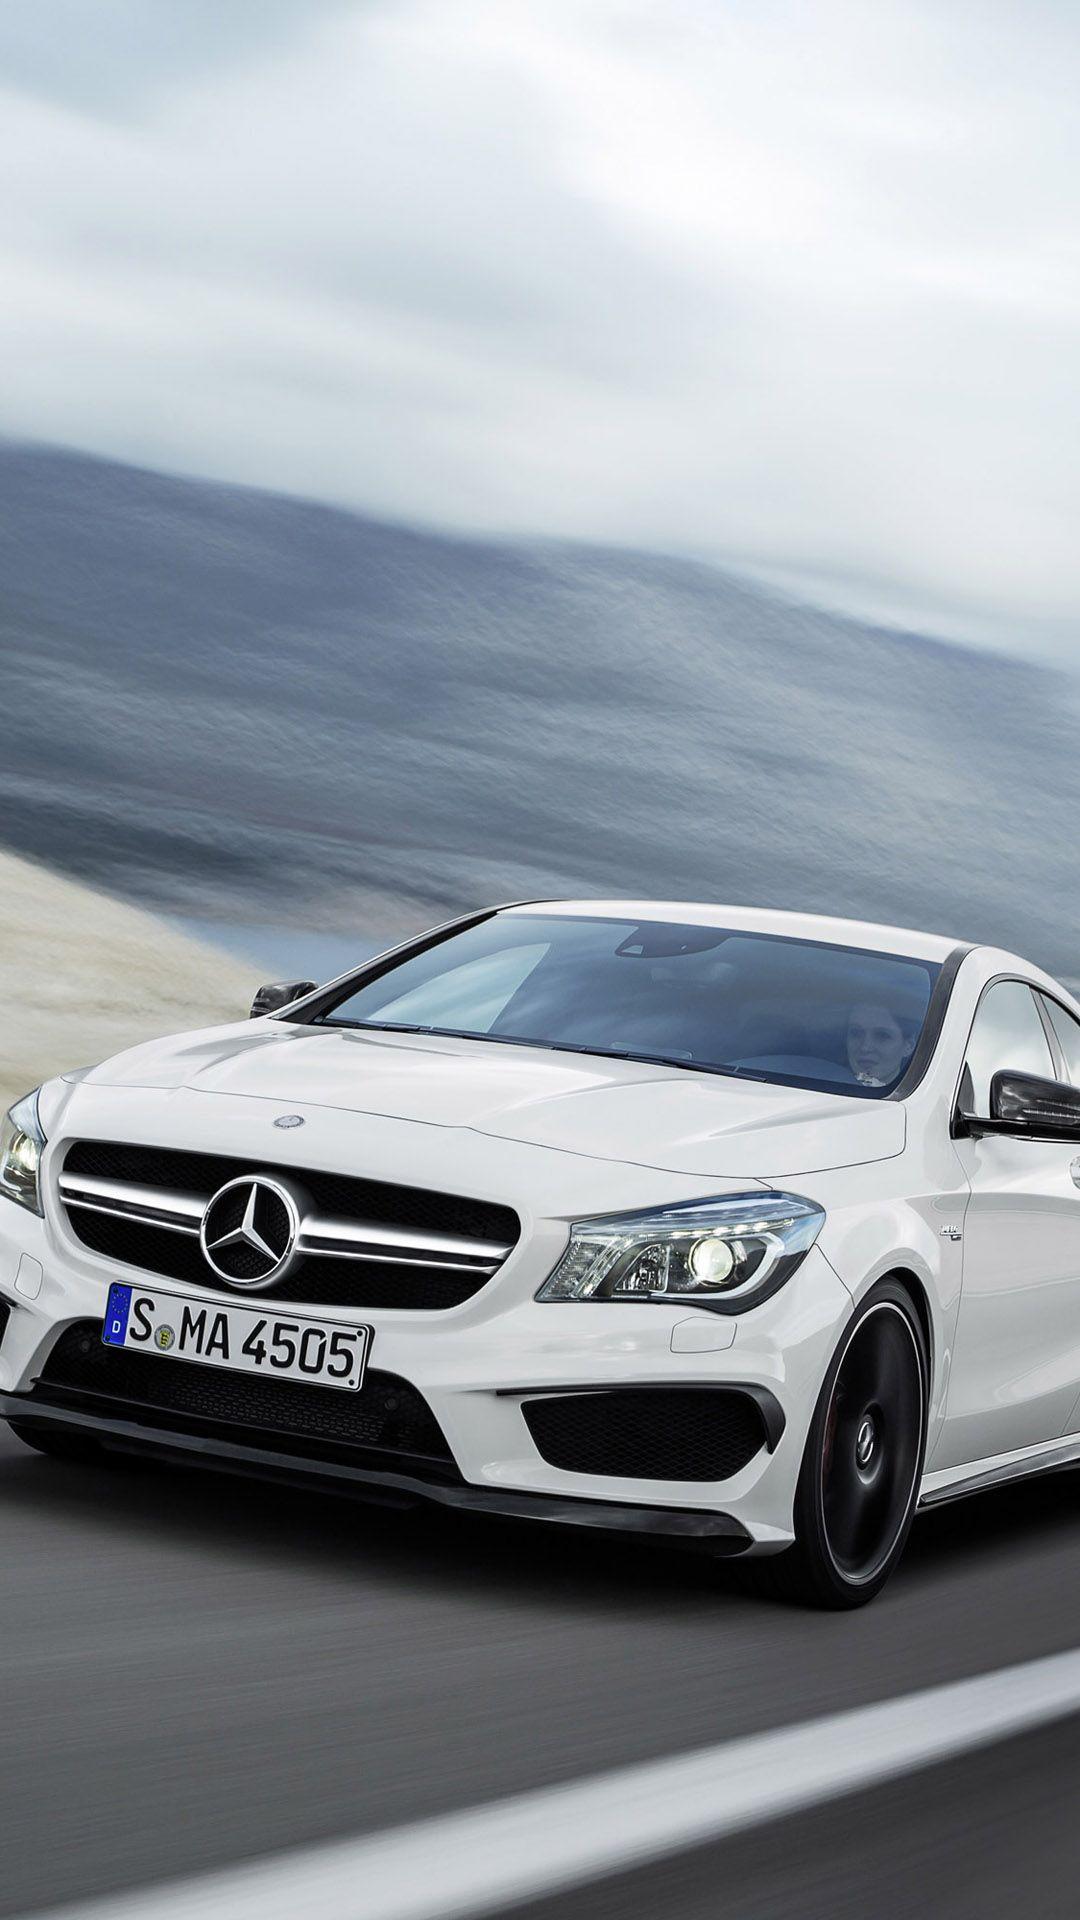 Mercedes Benz CLA 45 AMG htc one wallpaper, free and easy to